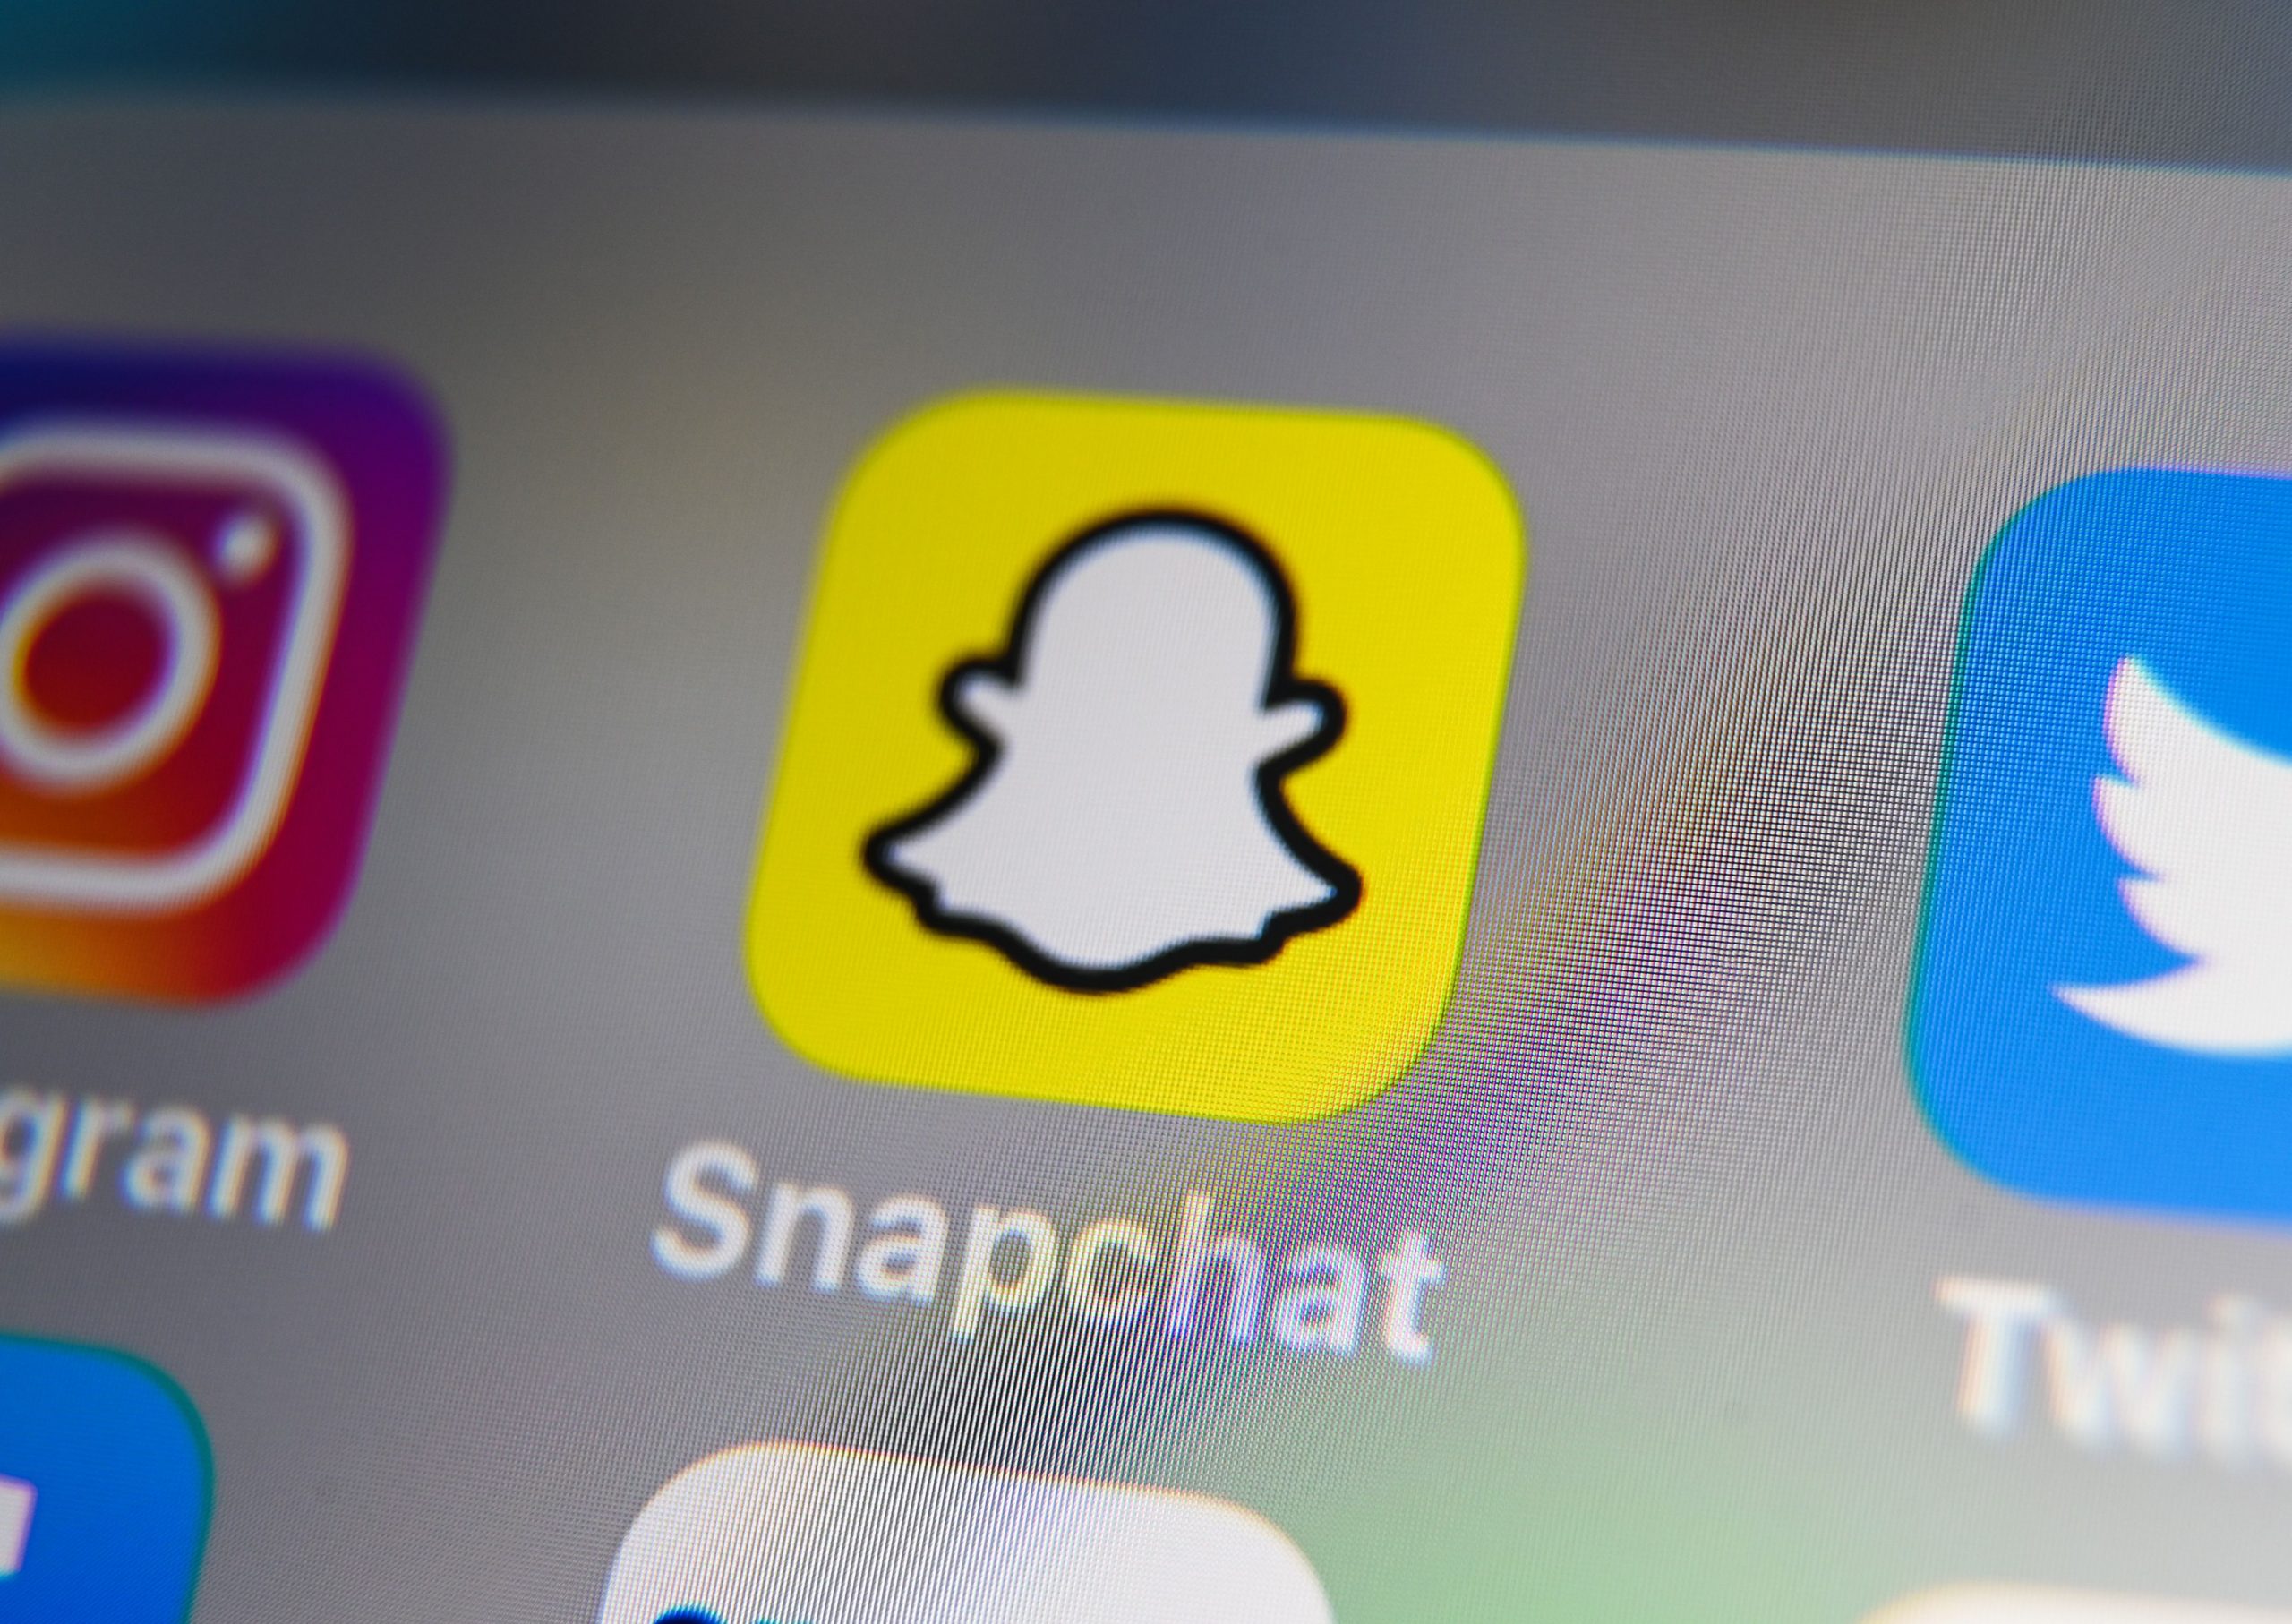 Snapchat releases and then deletes its latest insensitive filter | DeviceDaily.com